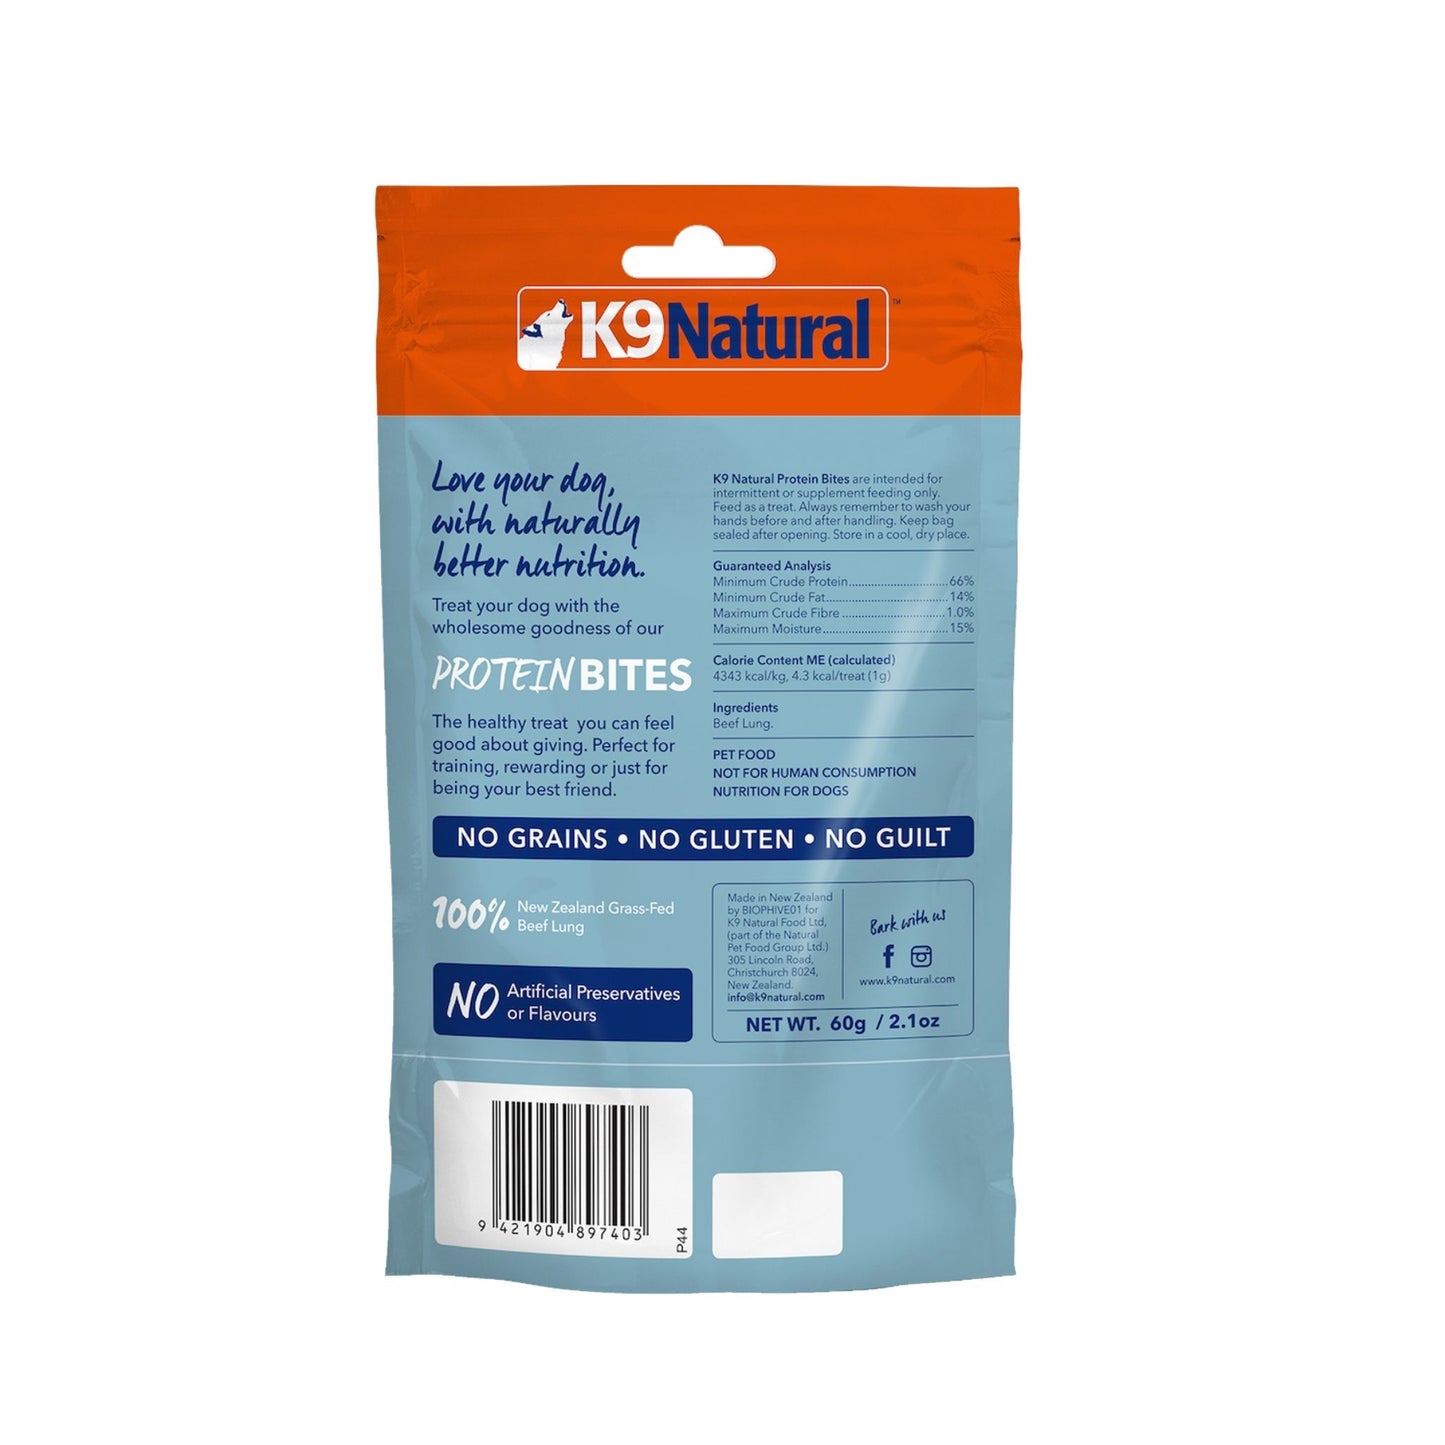 K9 Natural Air-dried Beef Lung Protein Bites 50g